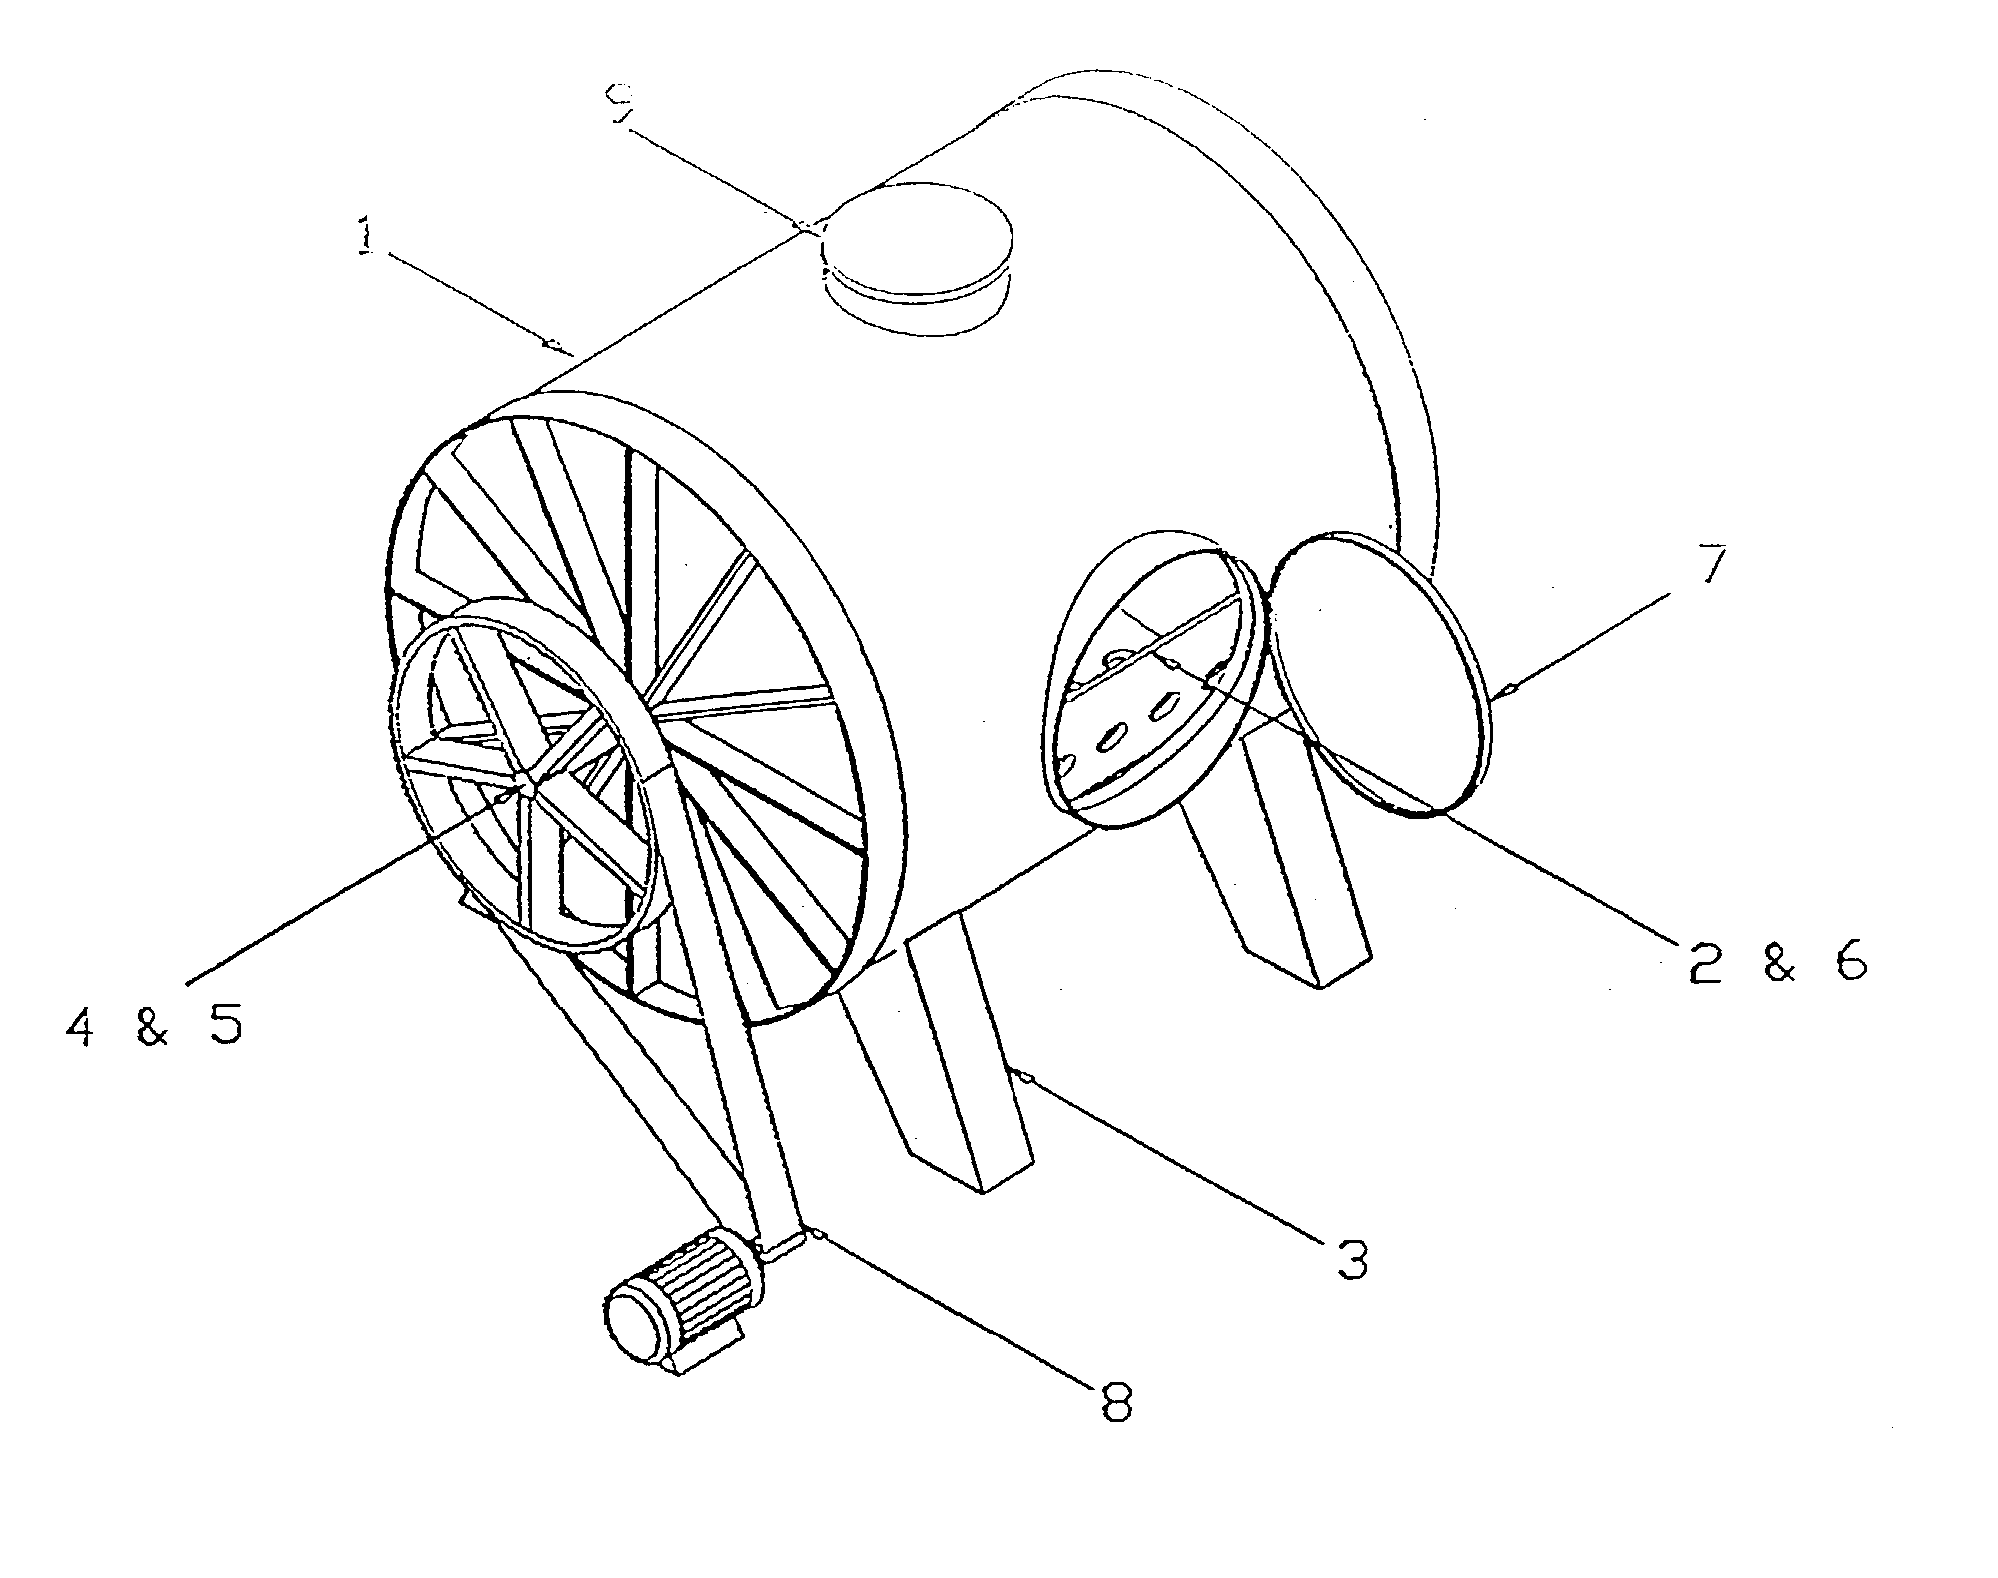 Device for leather processing